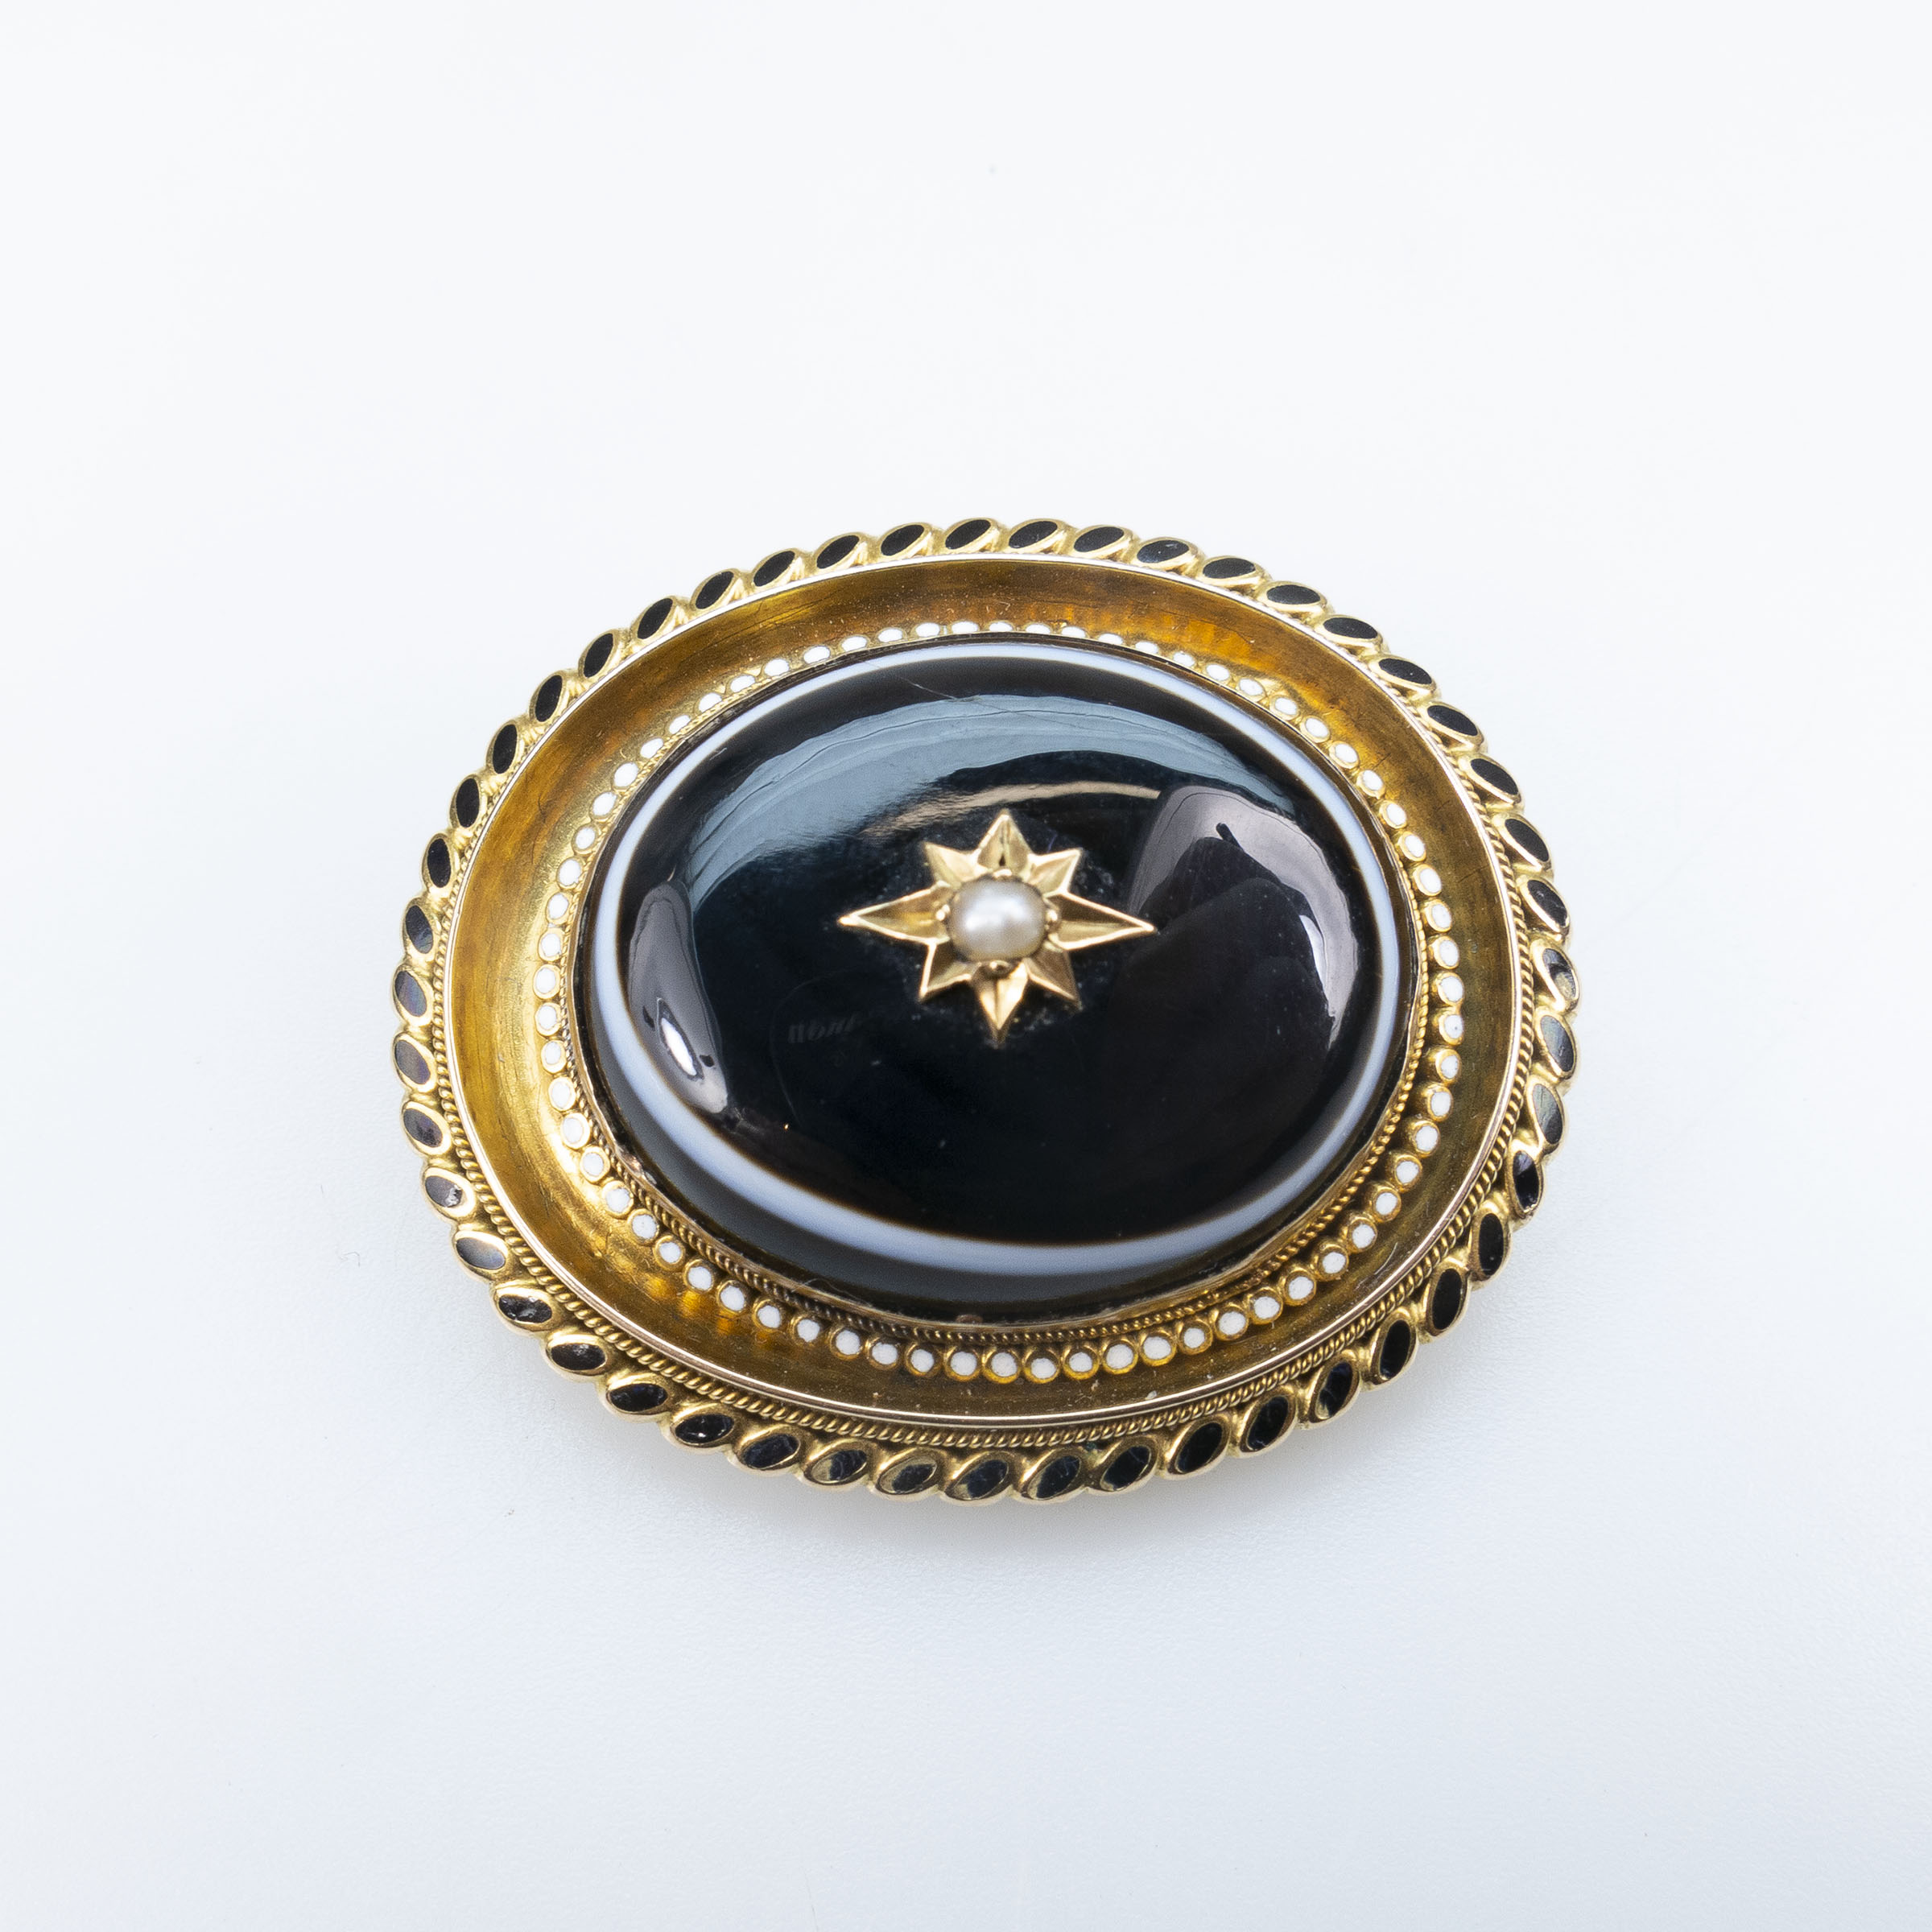 Late 19th Century 14k Yellow Gold & Gold-Filled Mourning Brooch/Pendant